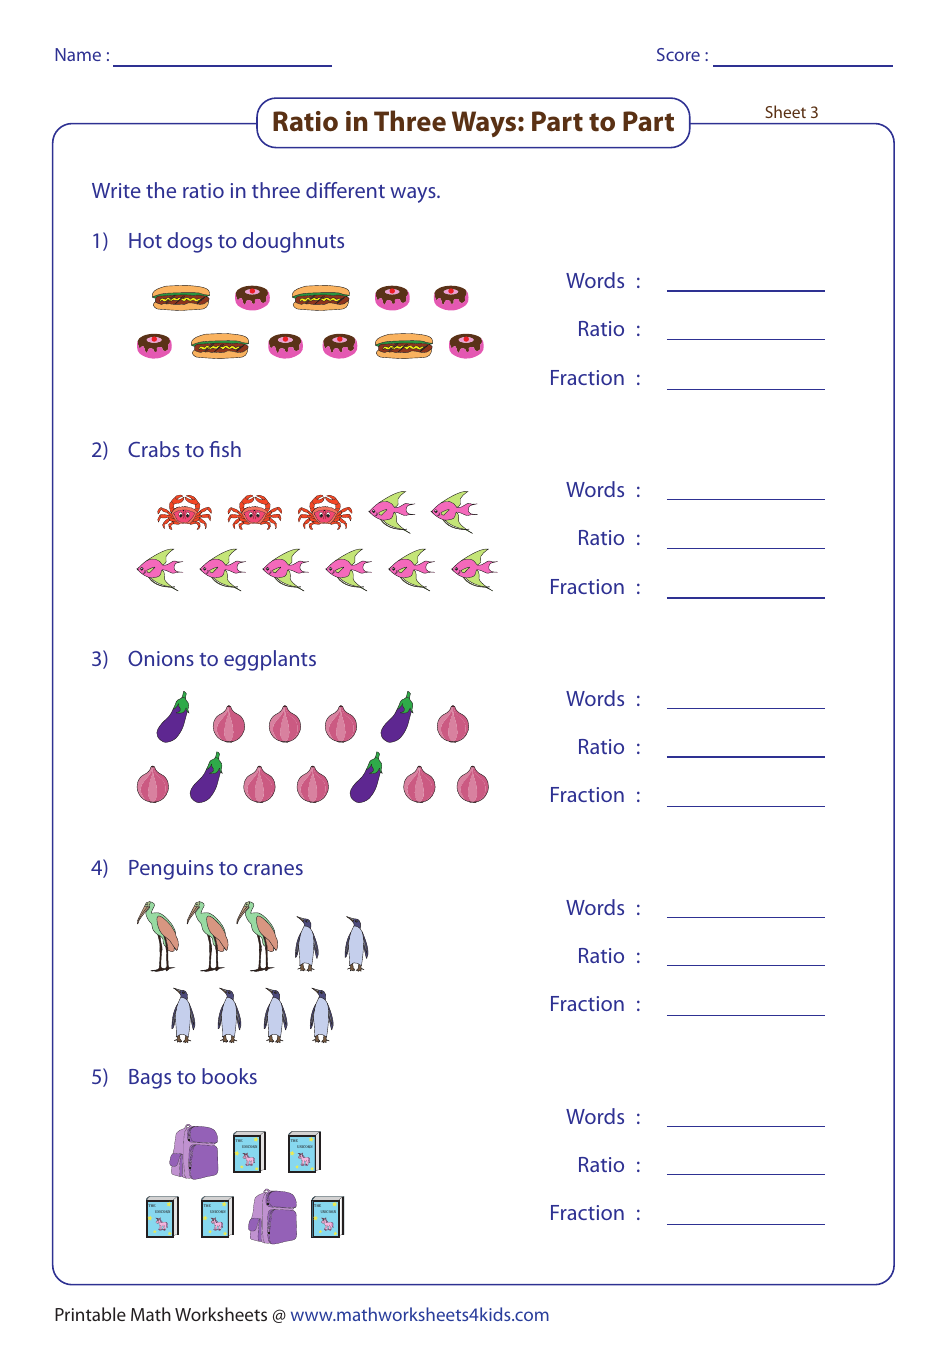 ratio-word-problems-k5-learning-free-worksheets-for-ratio-word-problems